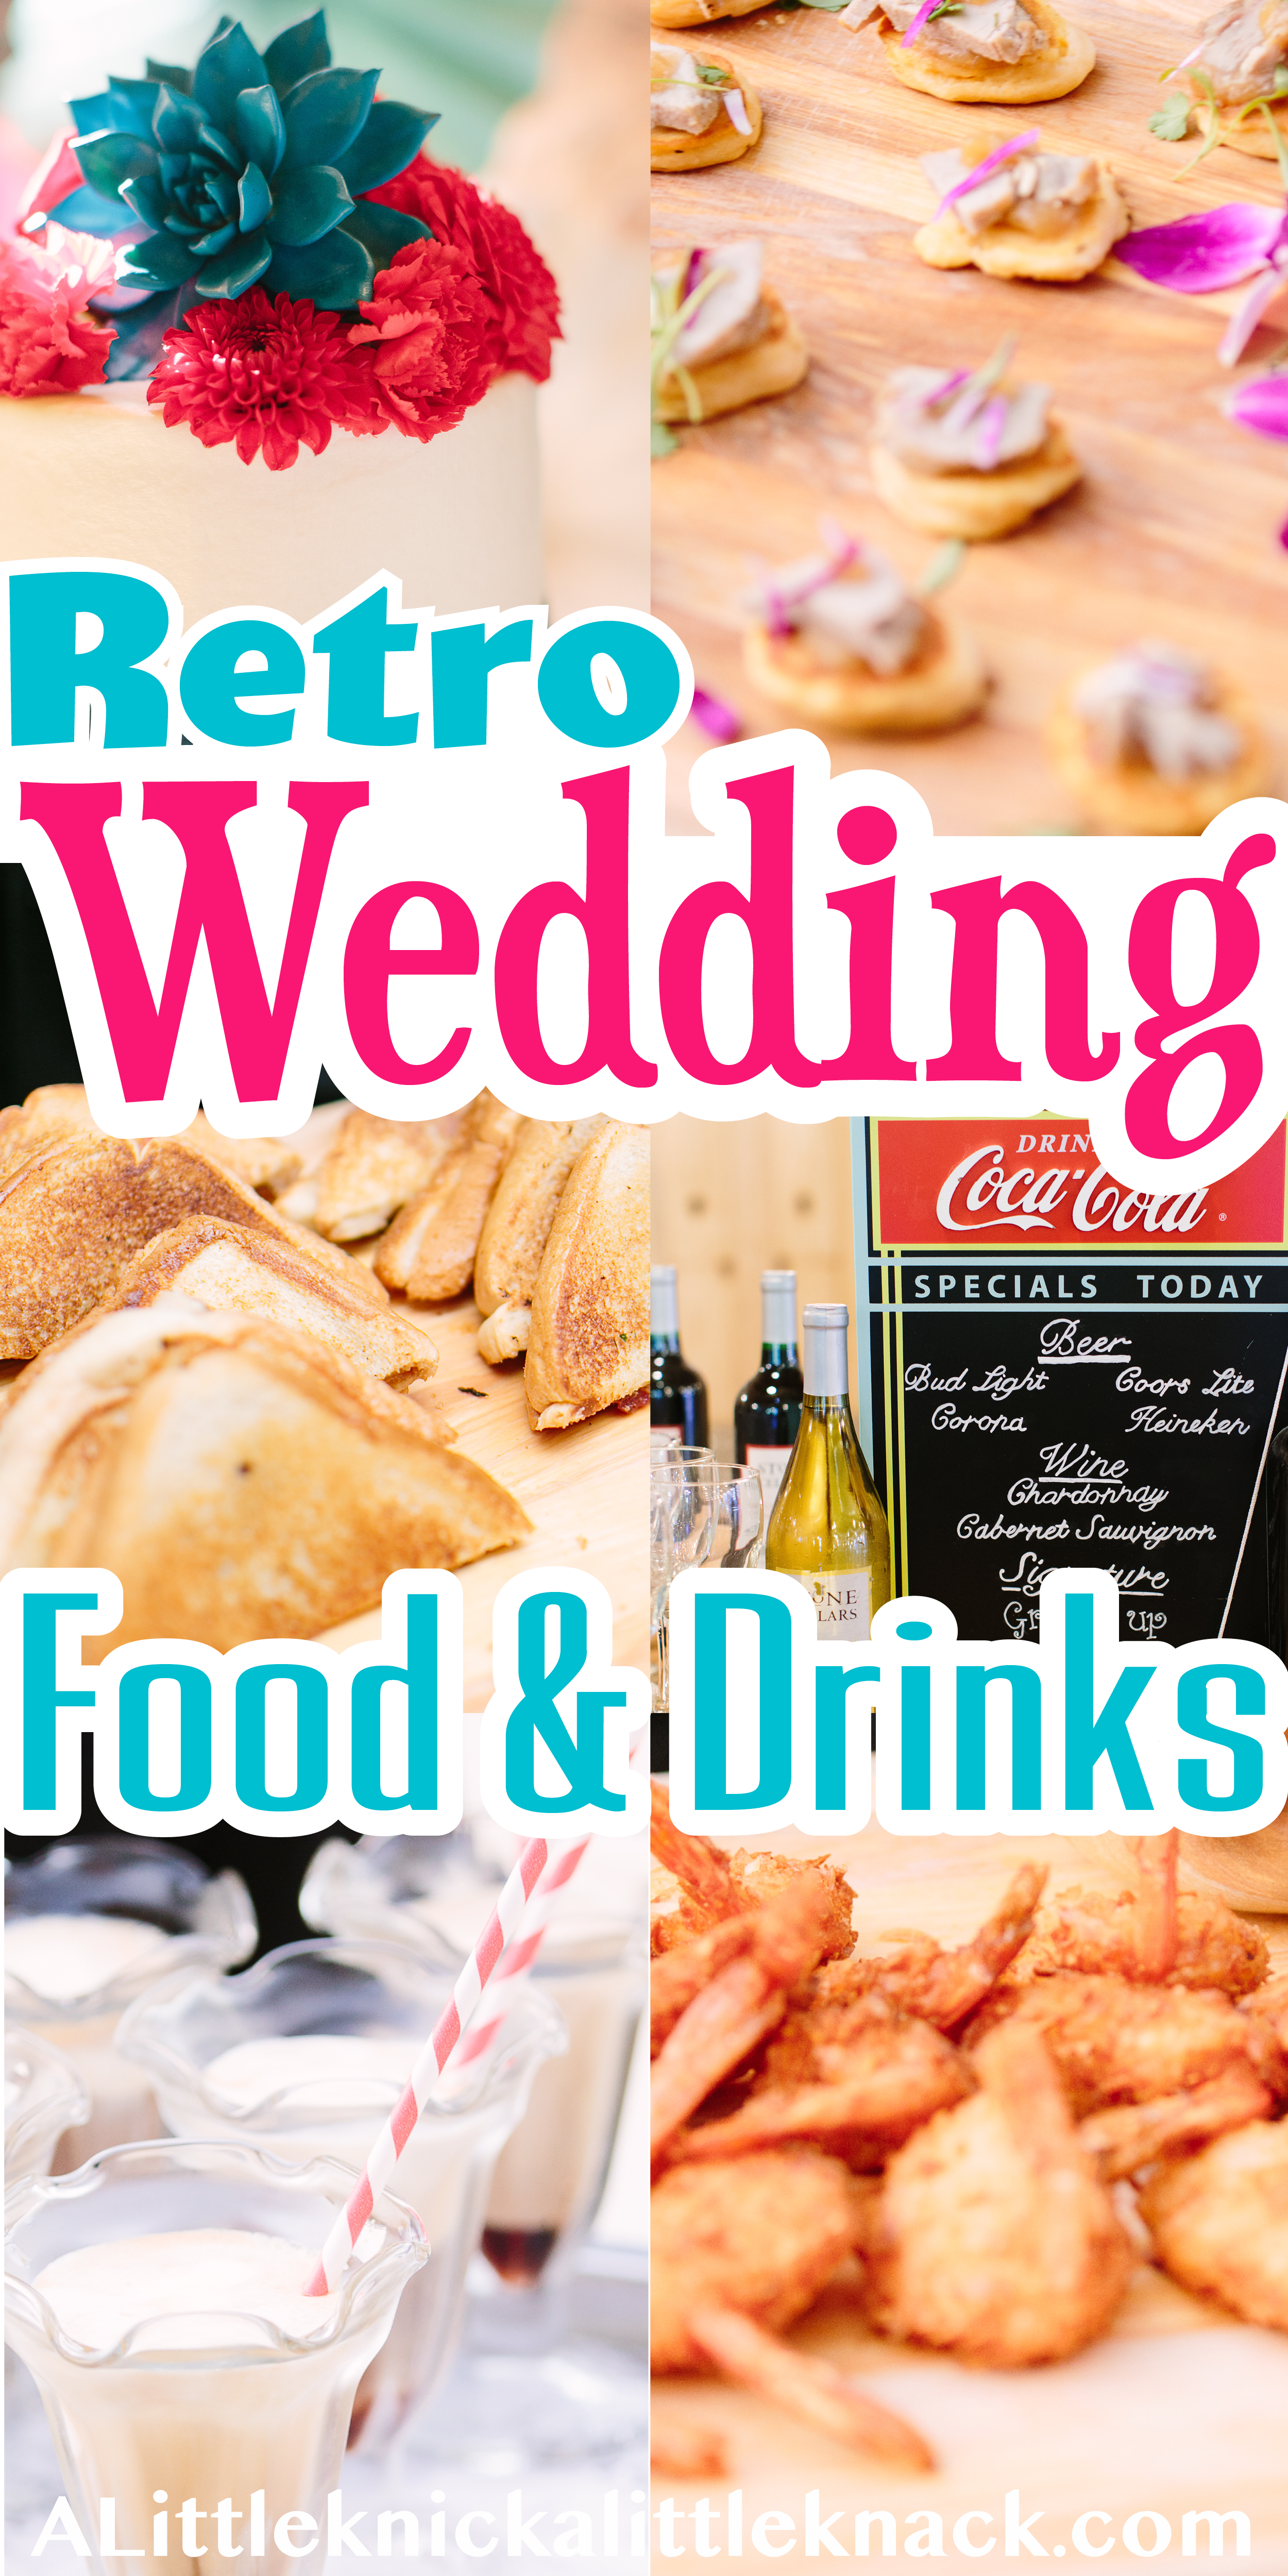 A collage of retro wedding food pictures with a text overlay